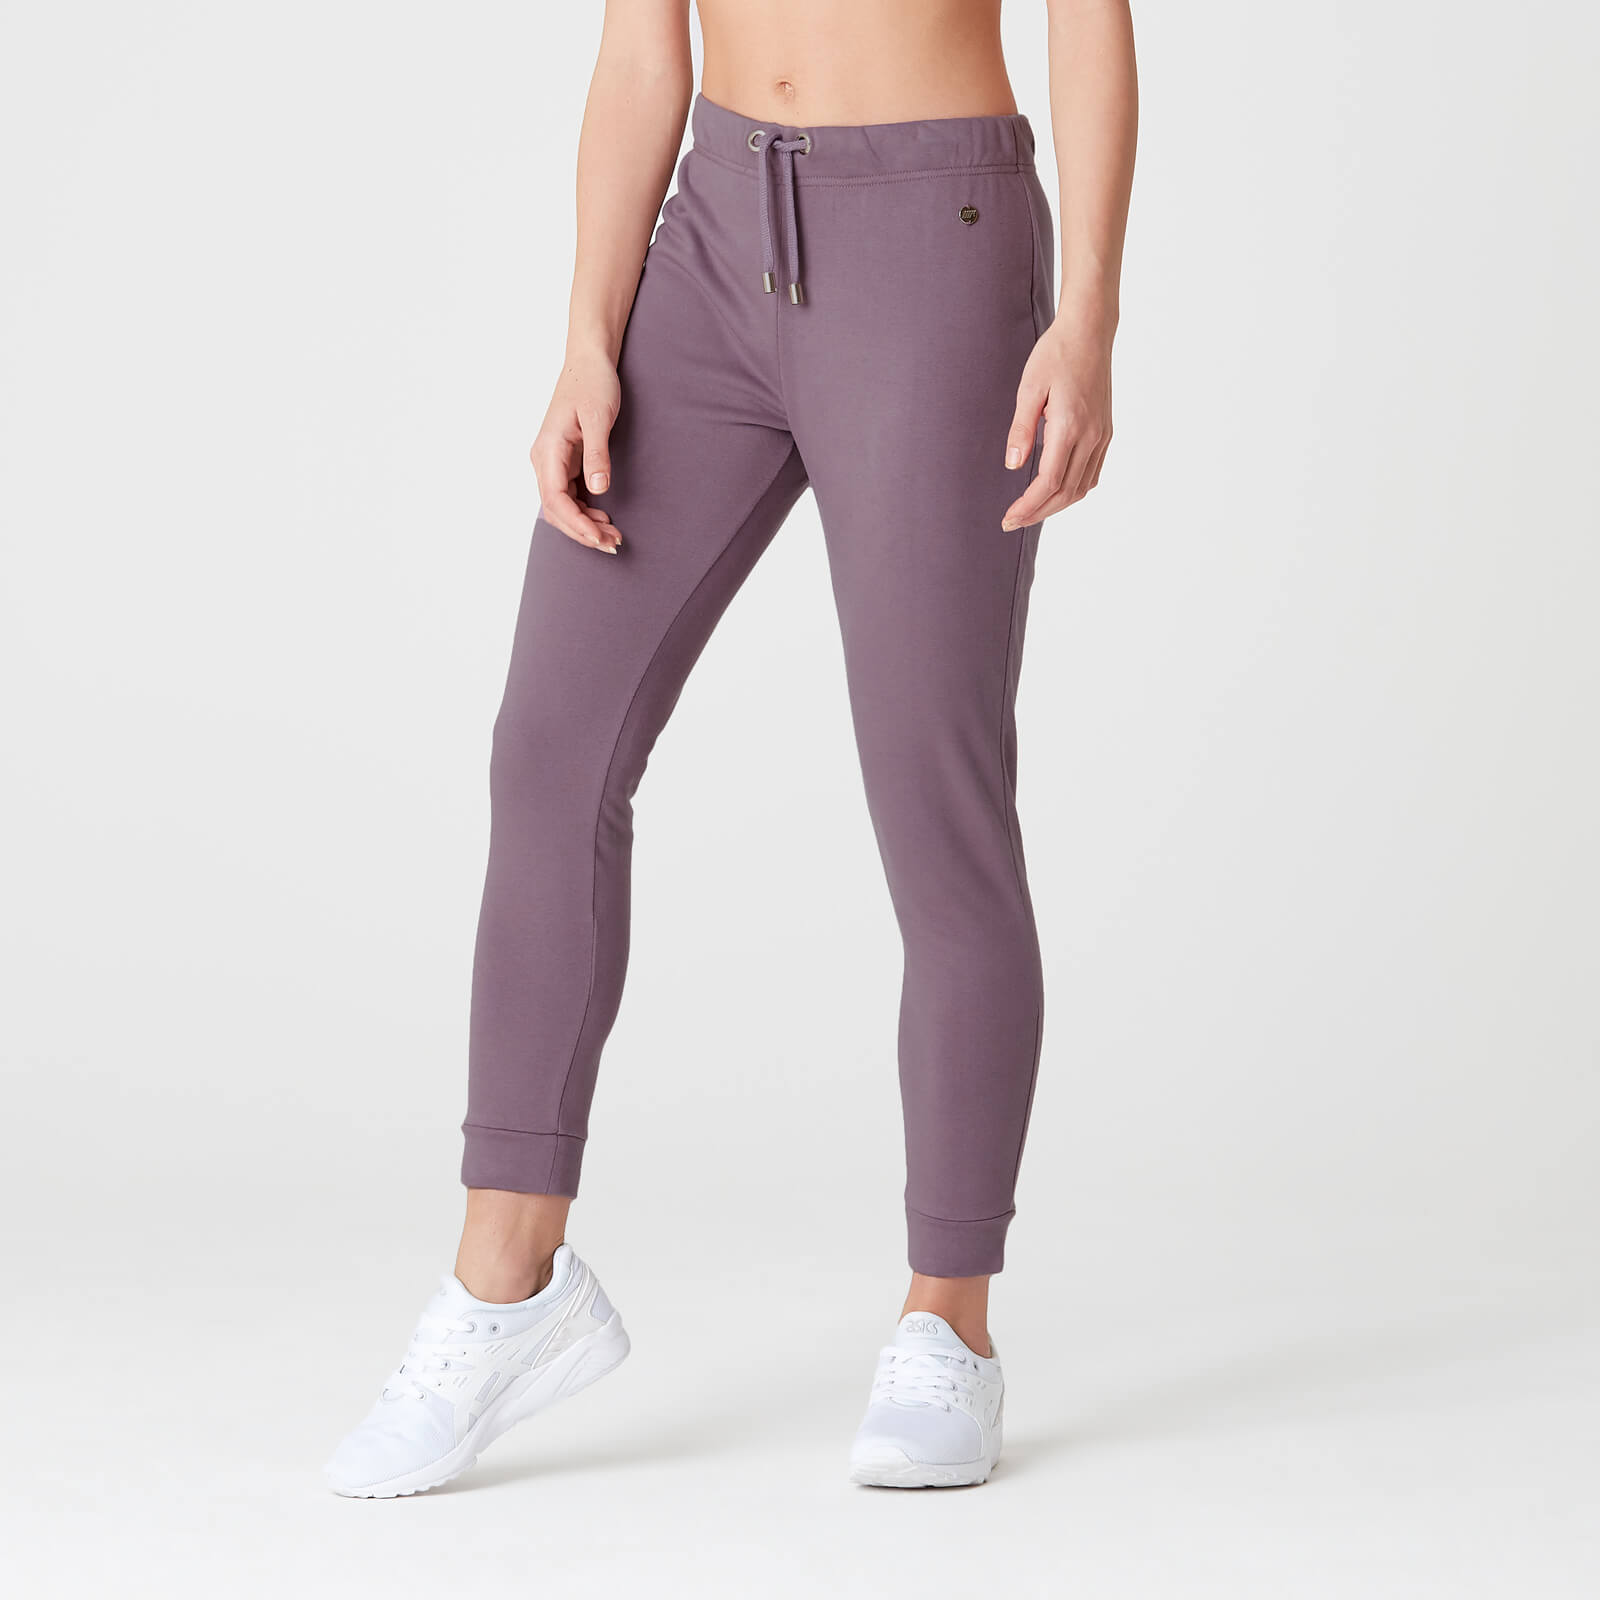 Myprotein Luxe Lounge Jogger - Mauve - M